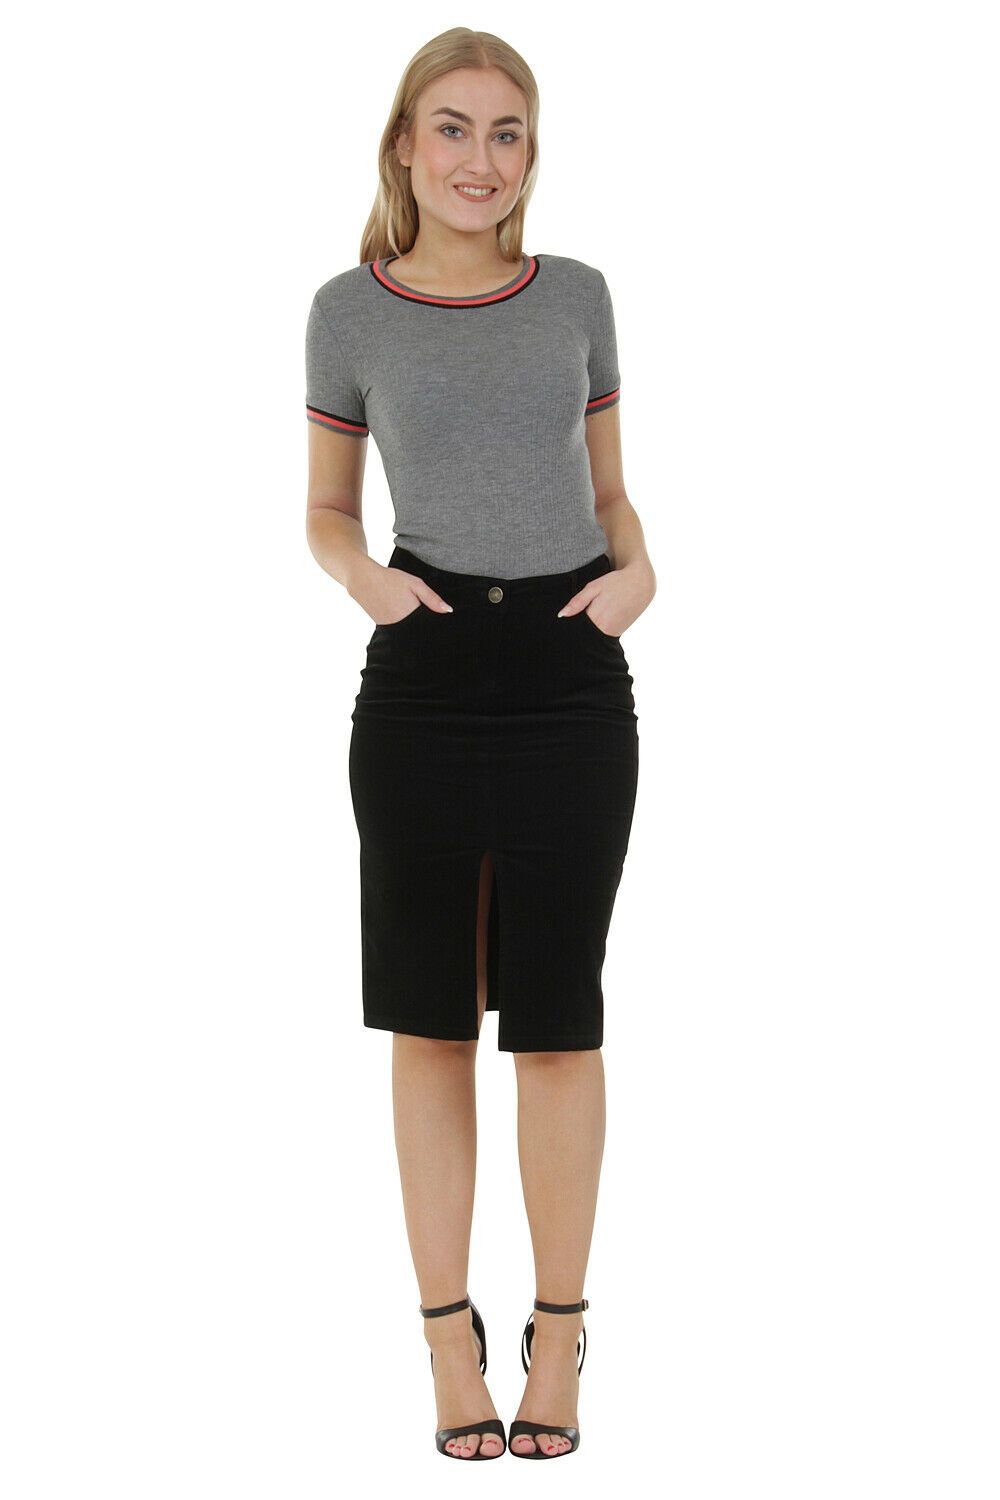 Side view of dark and stretchy fine-cord, knee-length skirt from Dungarees Online.